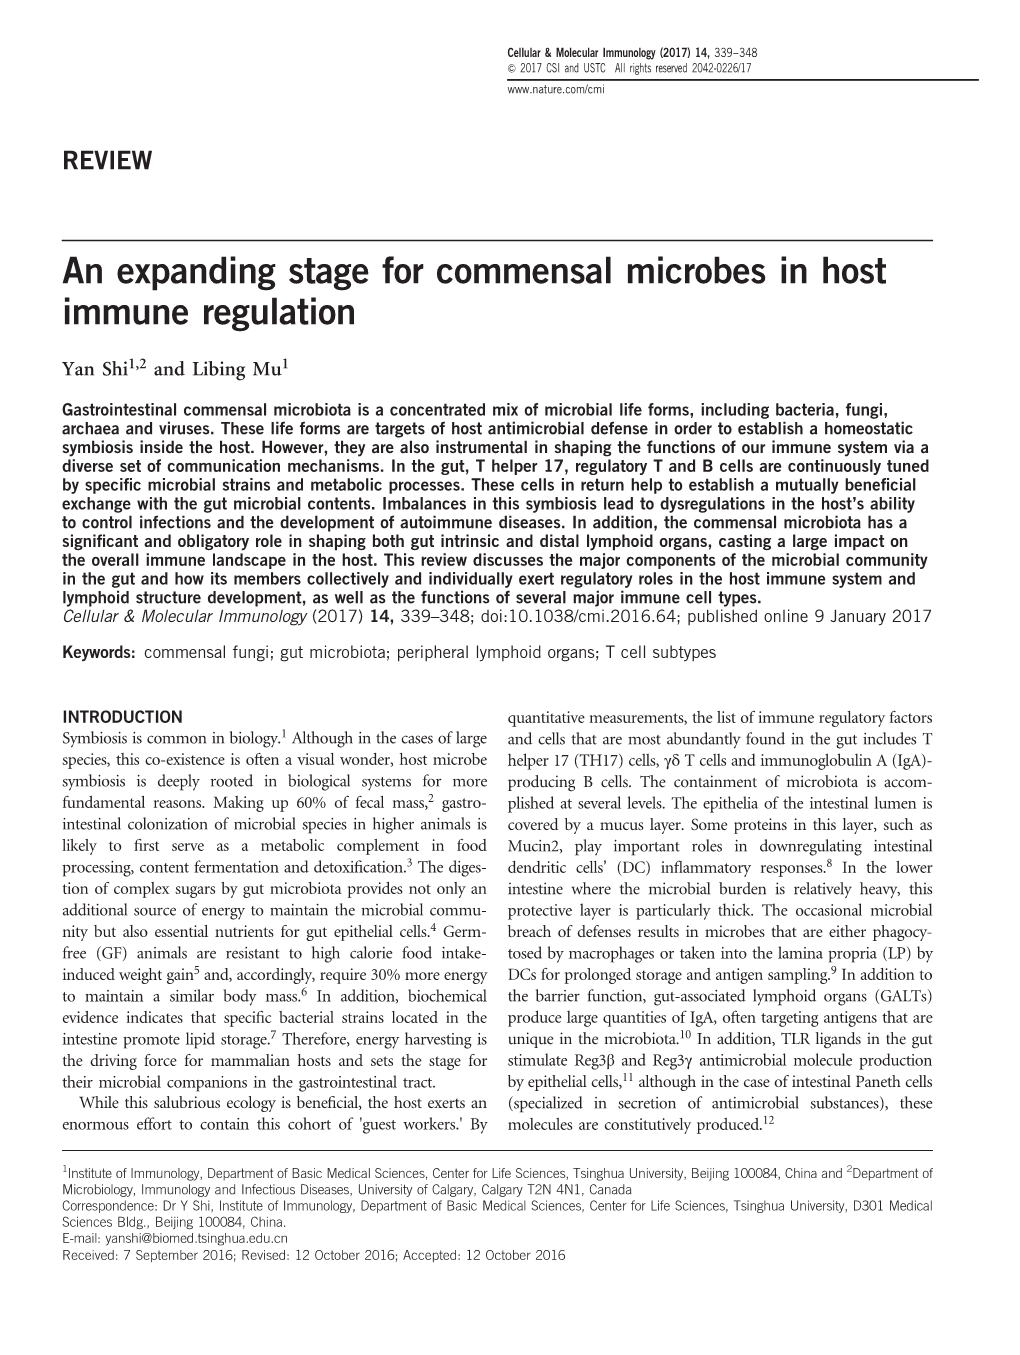 An Expanding Stage for Commensal Microbes in Host Immune Regulation